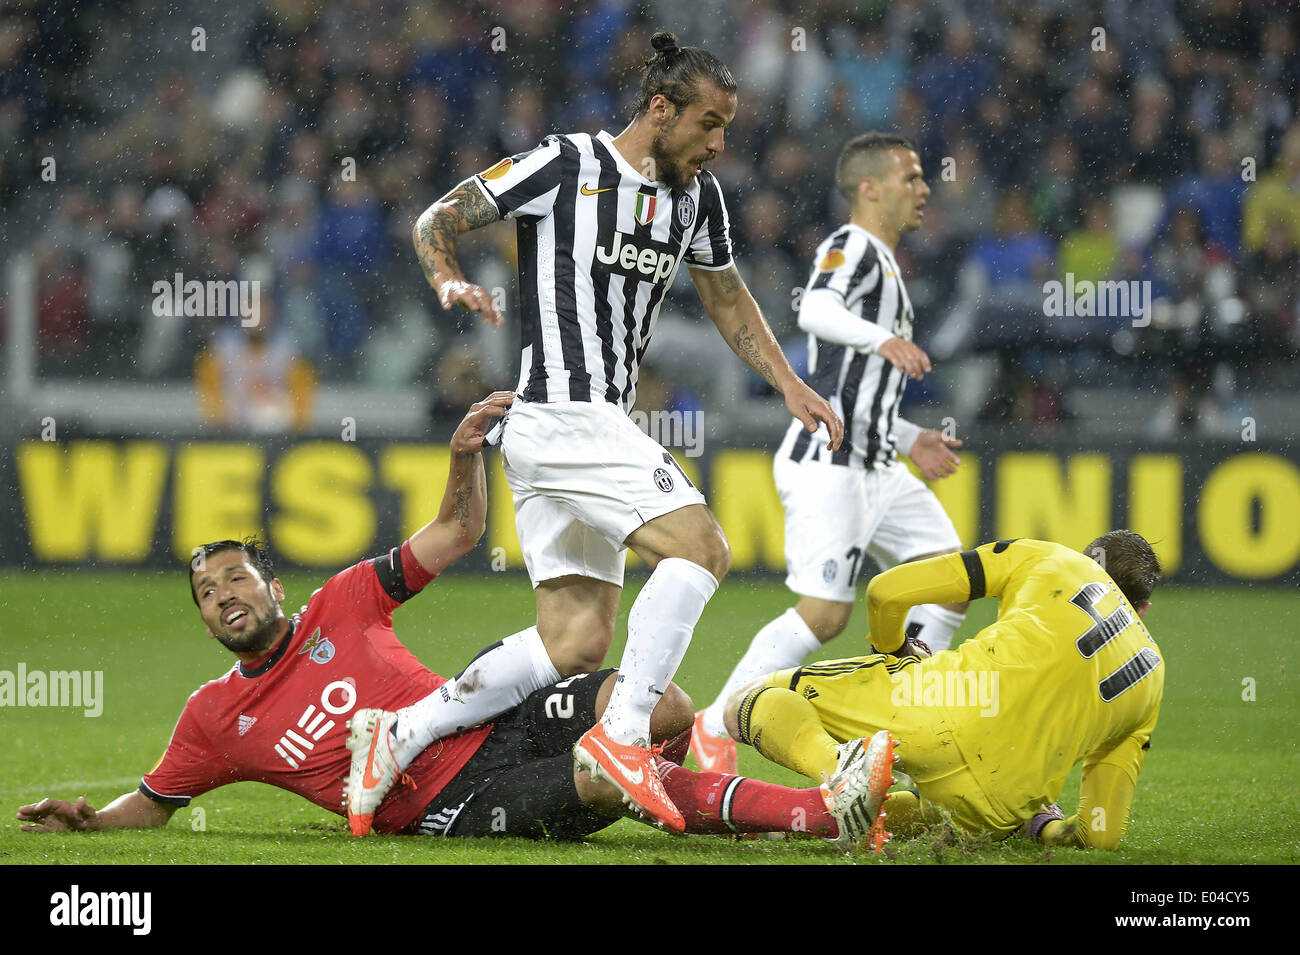 Turin, Italy. 1st May, 2014. Ezequiel Garay (L) of Benfica tackles as Pablo Osvaldo (C) of Juventus attacks during their semifinal match at the 2013/2014 UEFA Europa League in Turin, Italy, May 1, 2014. The match ended with a 0-0 tie and Benfica qualified to final with 2-1 on aggregate. Credit:  Alberto Lingria/Xinhua/Alamy Live News Stock Photo